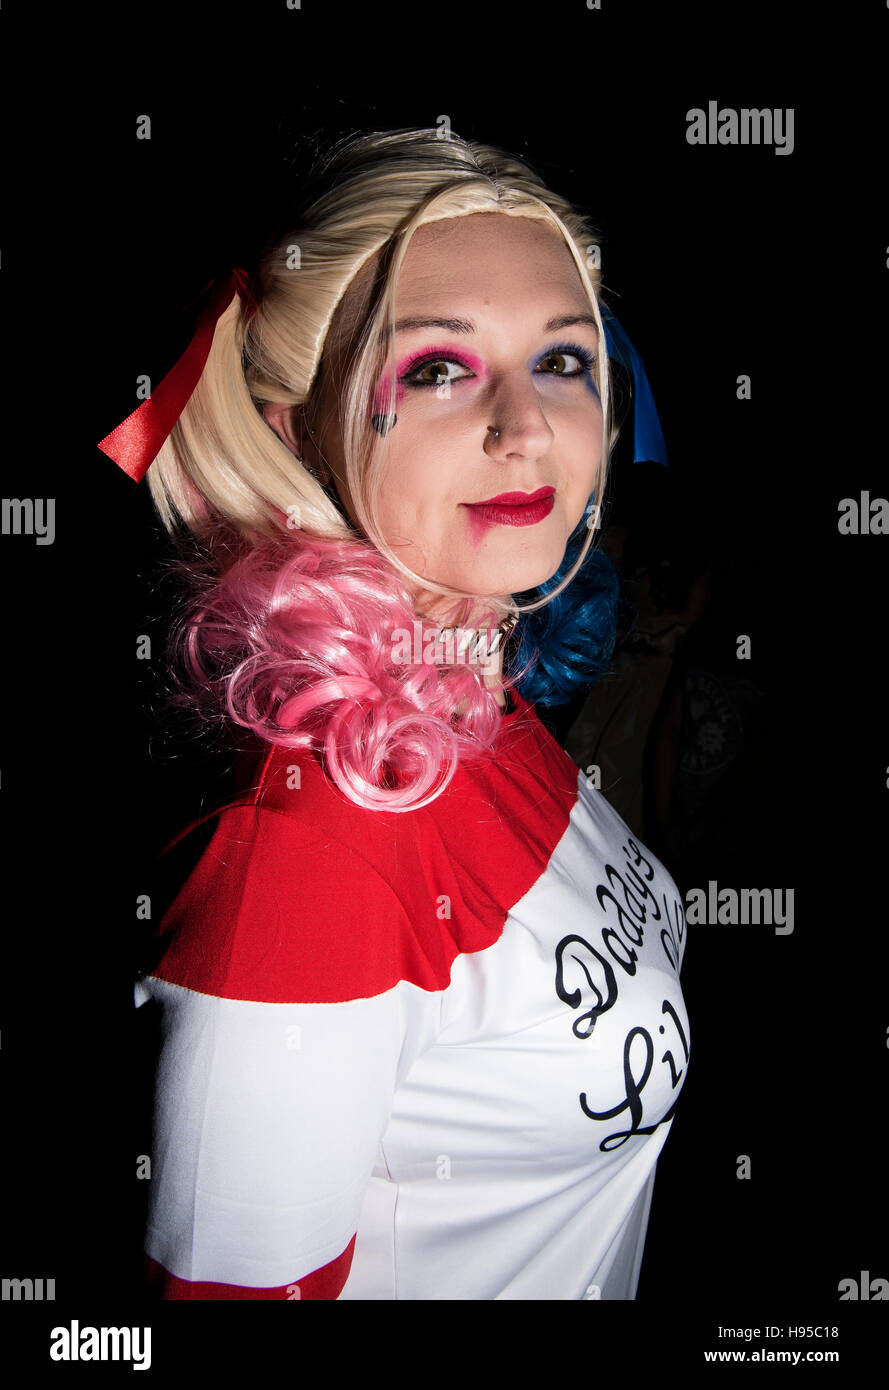 Birmingham, UK. 19th Nov, 2016. Comic Con opens at the Birmingham NEC. Visitors arrive in costume to meet friends and re-enact scenes from their favourite films and comic books. This woman dresses as Suicide Squad character Harley Quinn. Credit:  Richard Grange/Alamy Live News Stock Photo